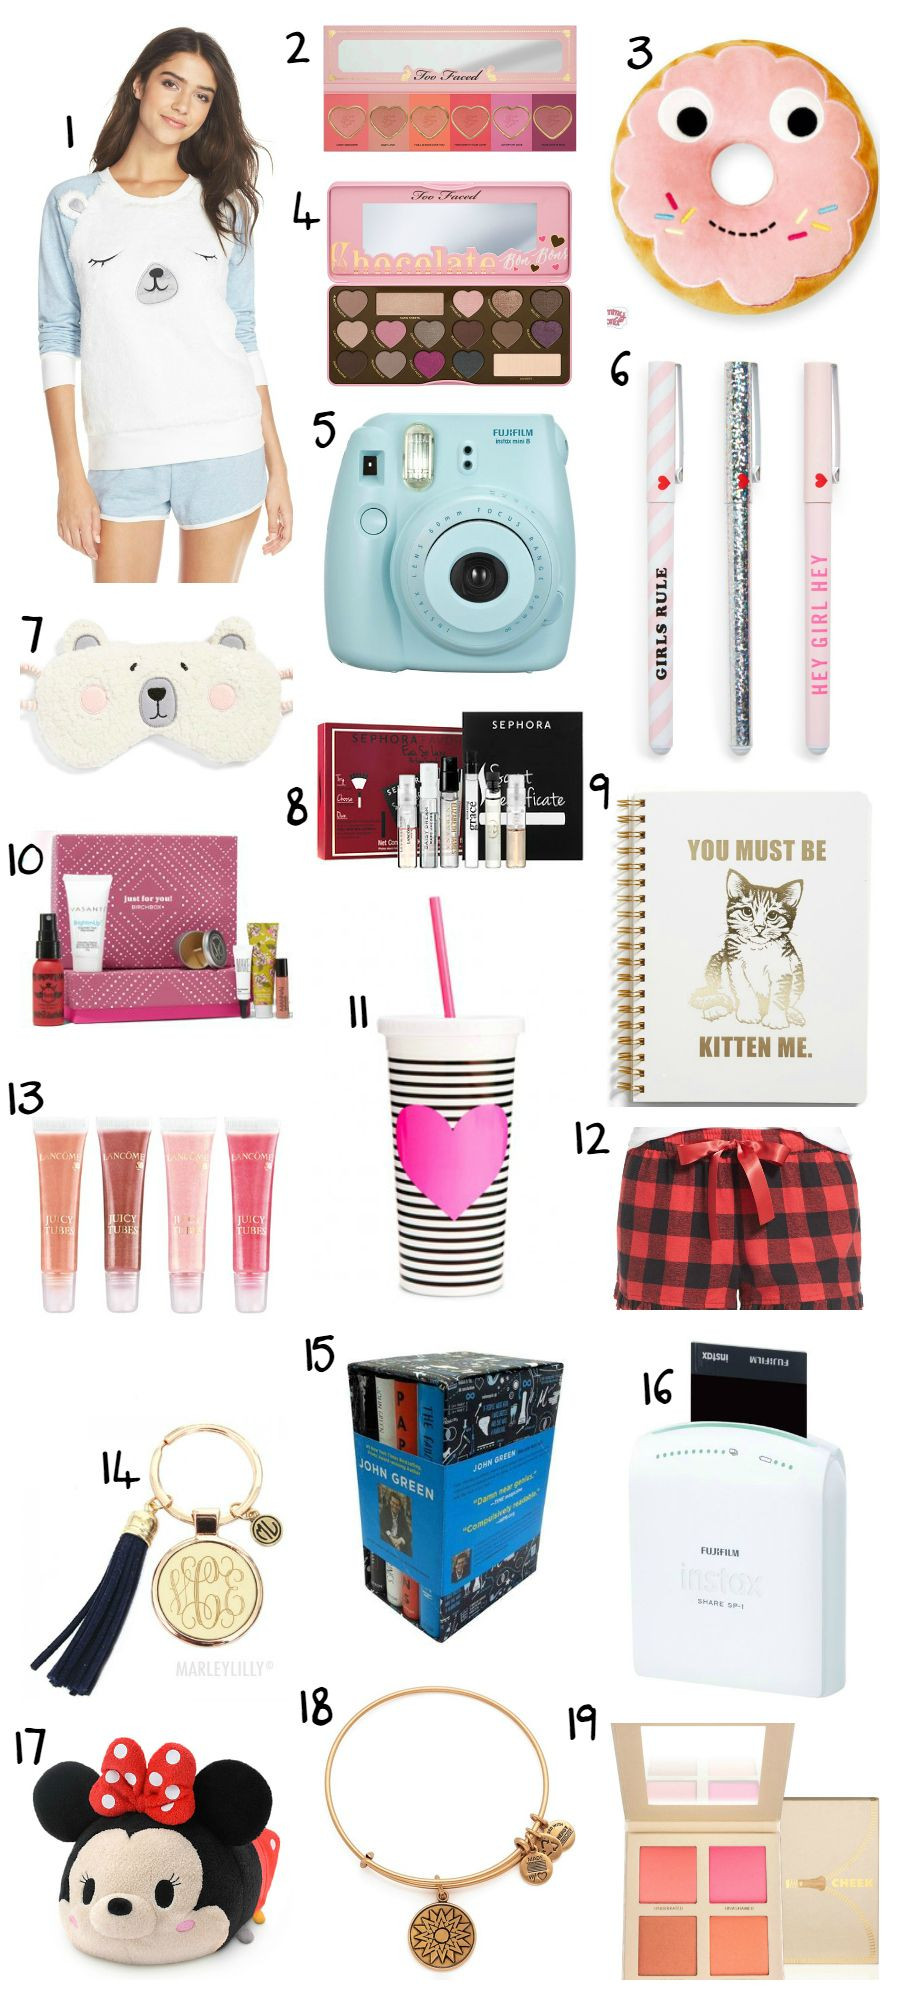 Teenage Girls Birthday Gift Ideas
 The Best Christmas Gift Ideas for Teens